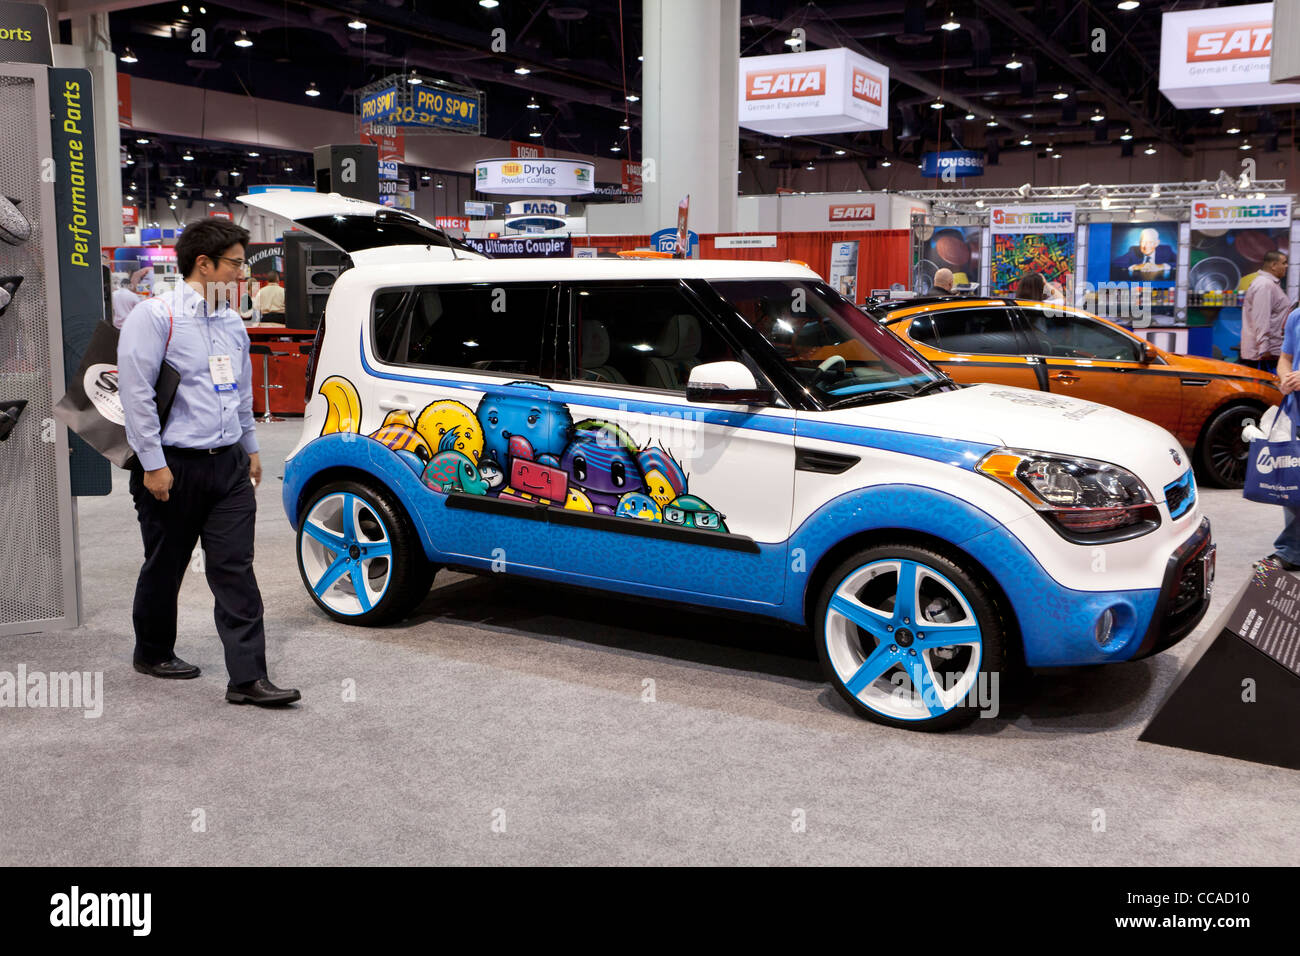 “Hole in One” Kia Soul - Kia Concept car inspired by Michelle Wie Stock Photo